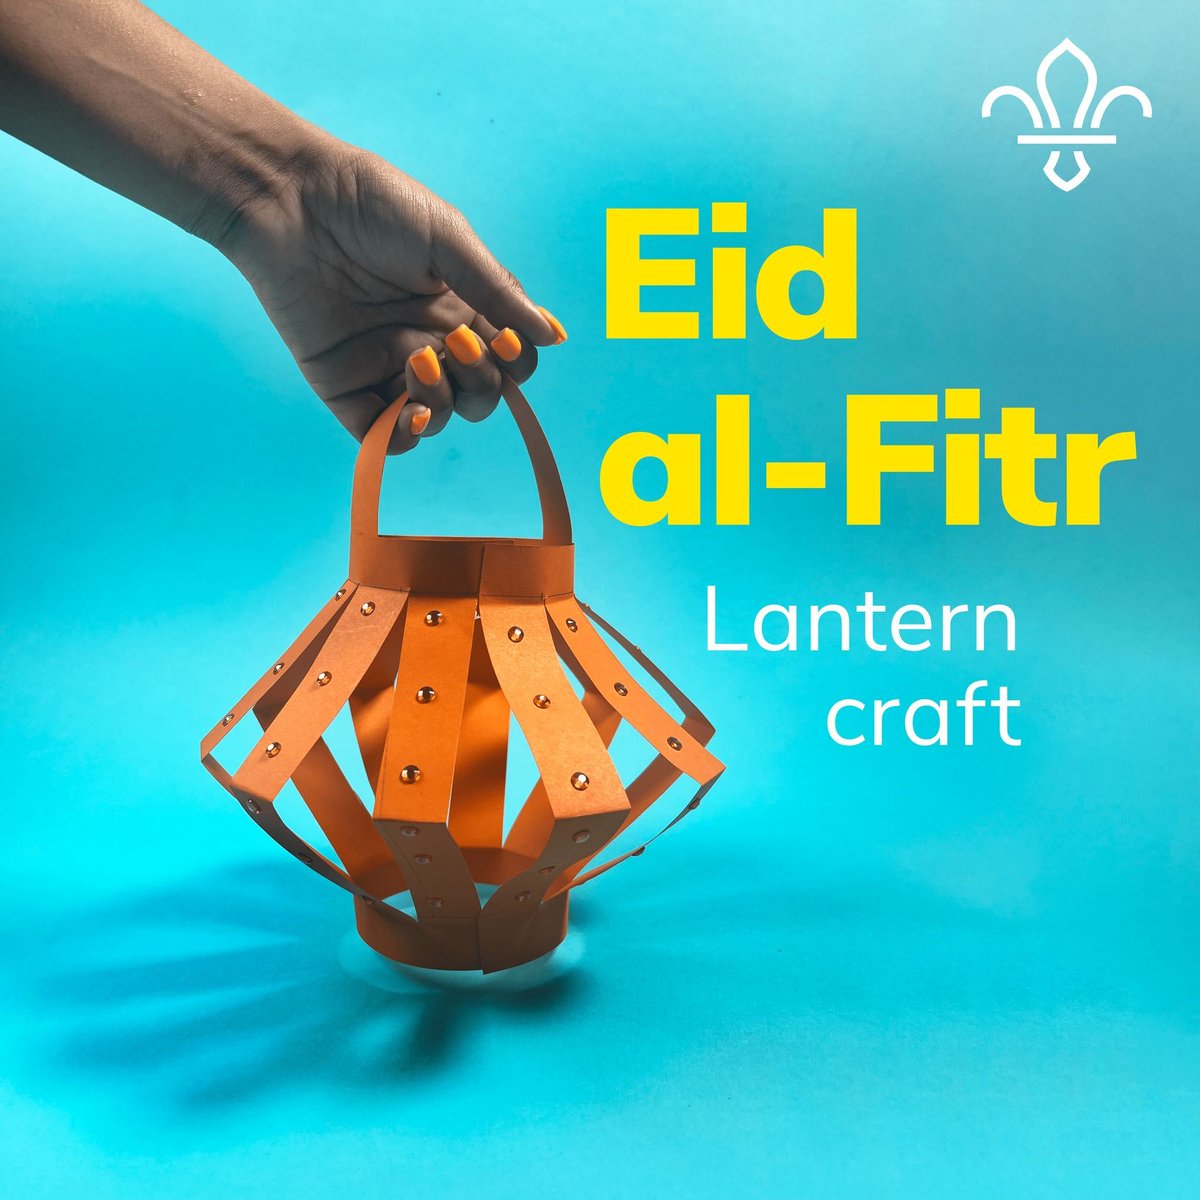 Eid Mubarak to all who’re celebrating. Learn more about Eid al-Fitr with our lantern craft: buff.ly/43PGprI